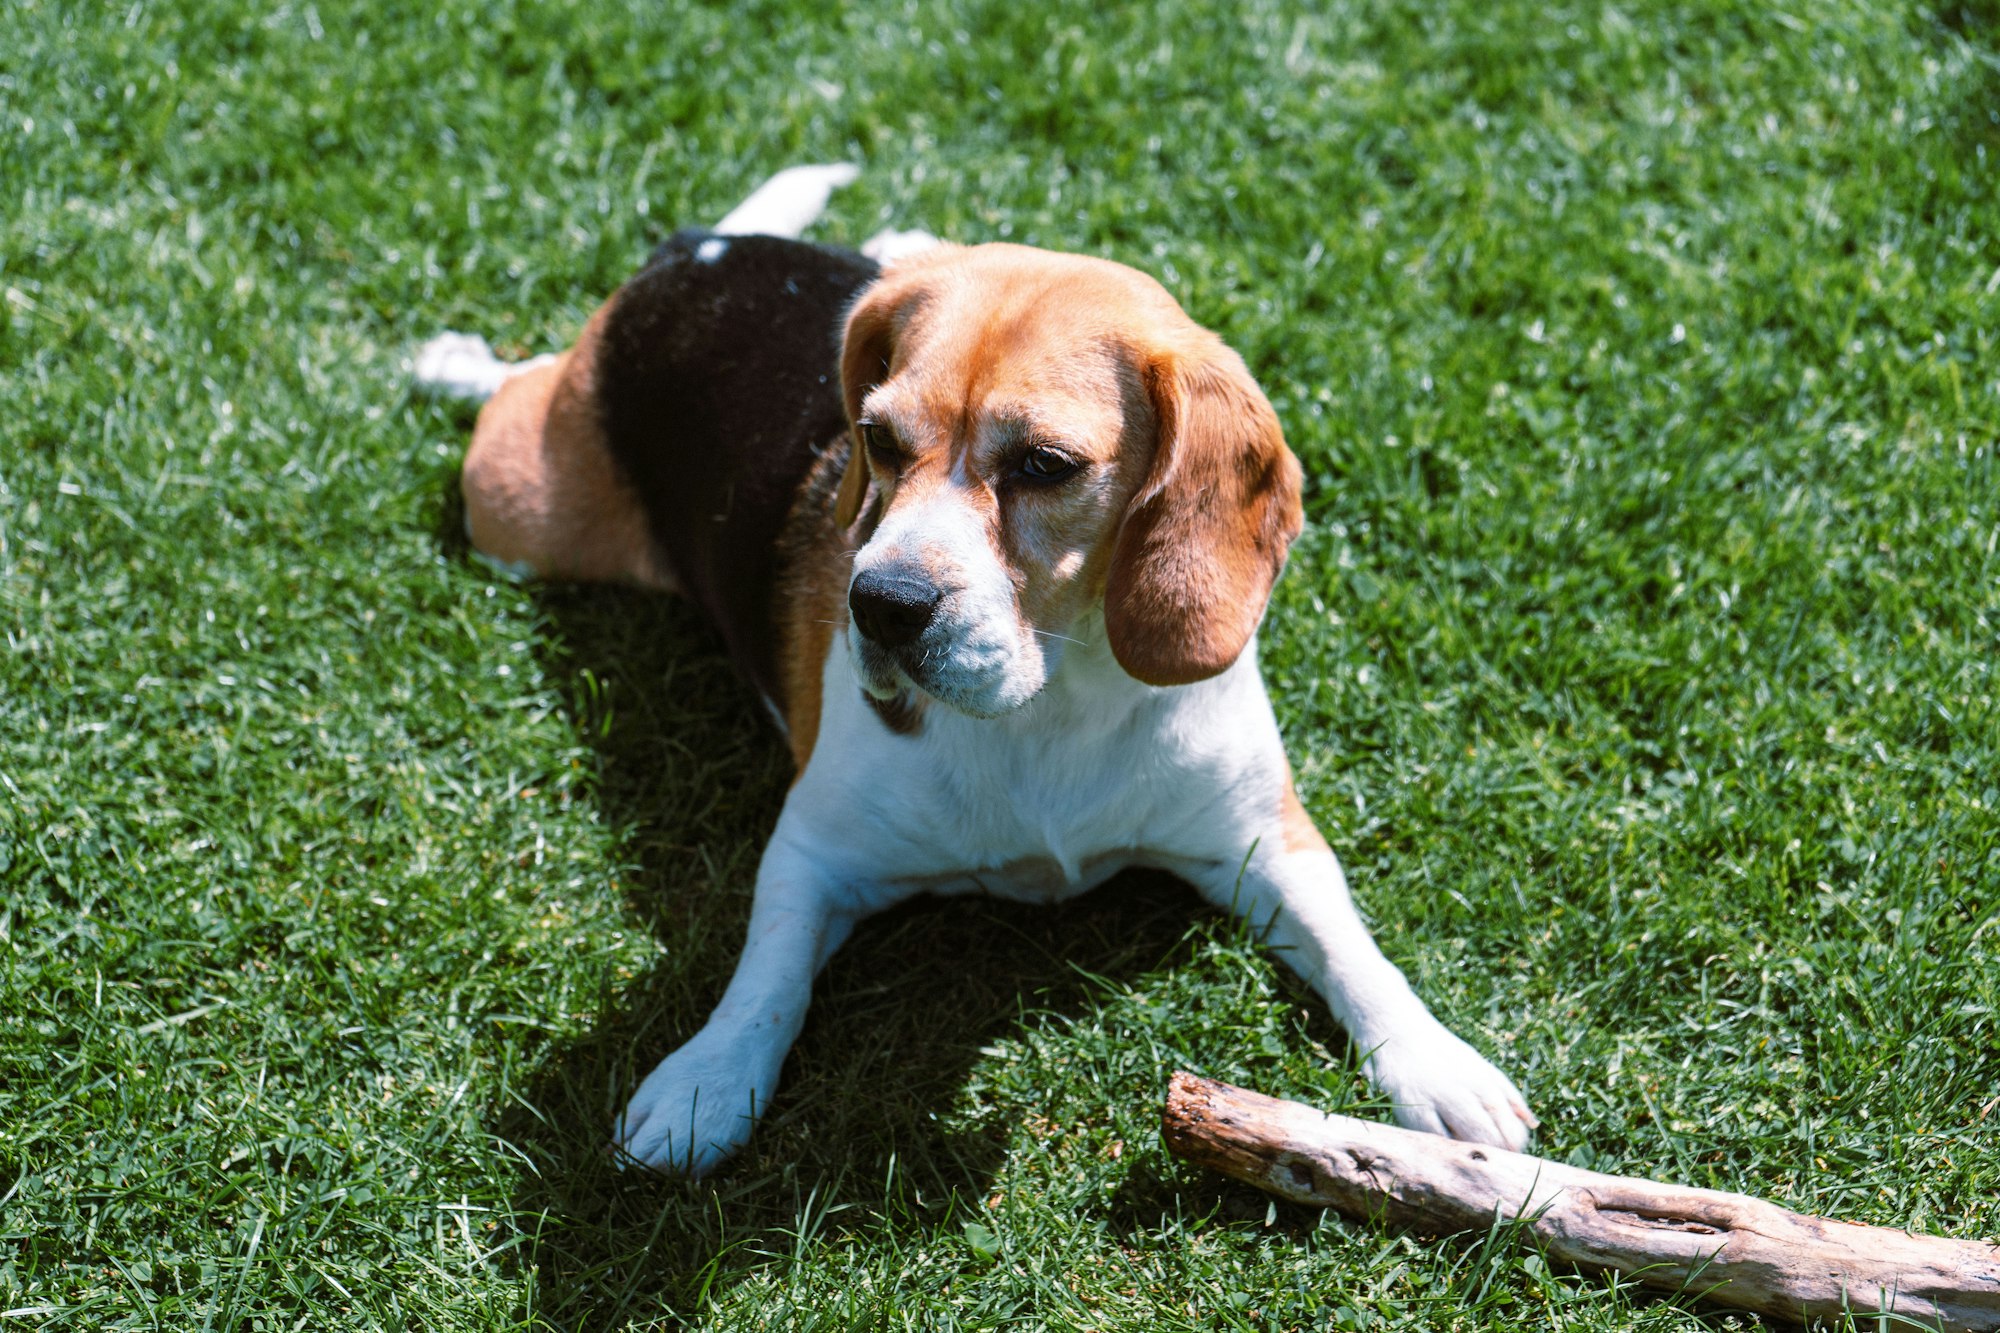 Beagle dog lying on the grass with a stick.